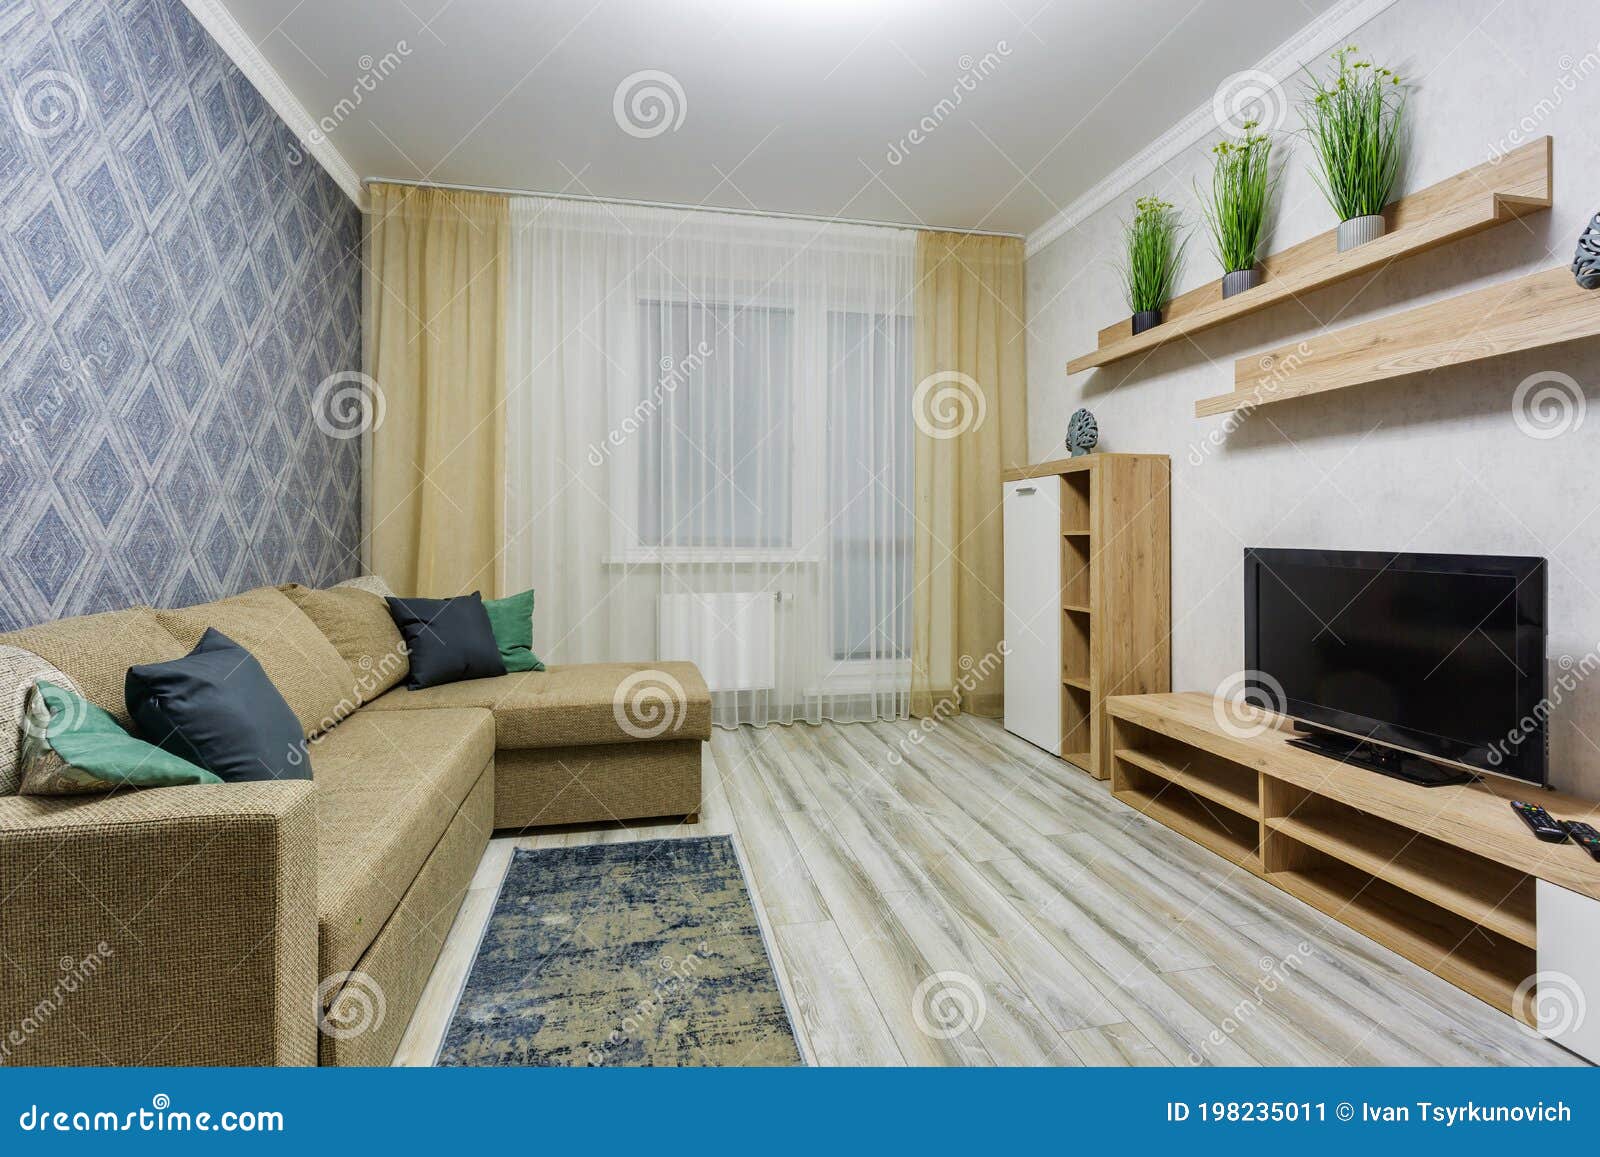 Interior of Modern Luxure Guest Room in Studio Apartments in Minimalistic  Style with Sofa and Tv Stock Image - Image of curtains, condo: 198235011